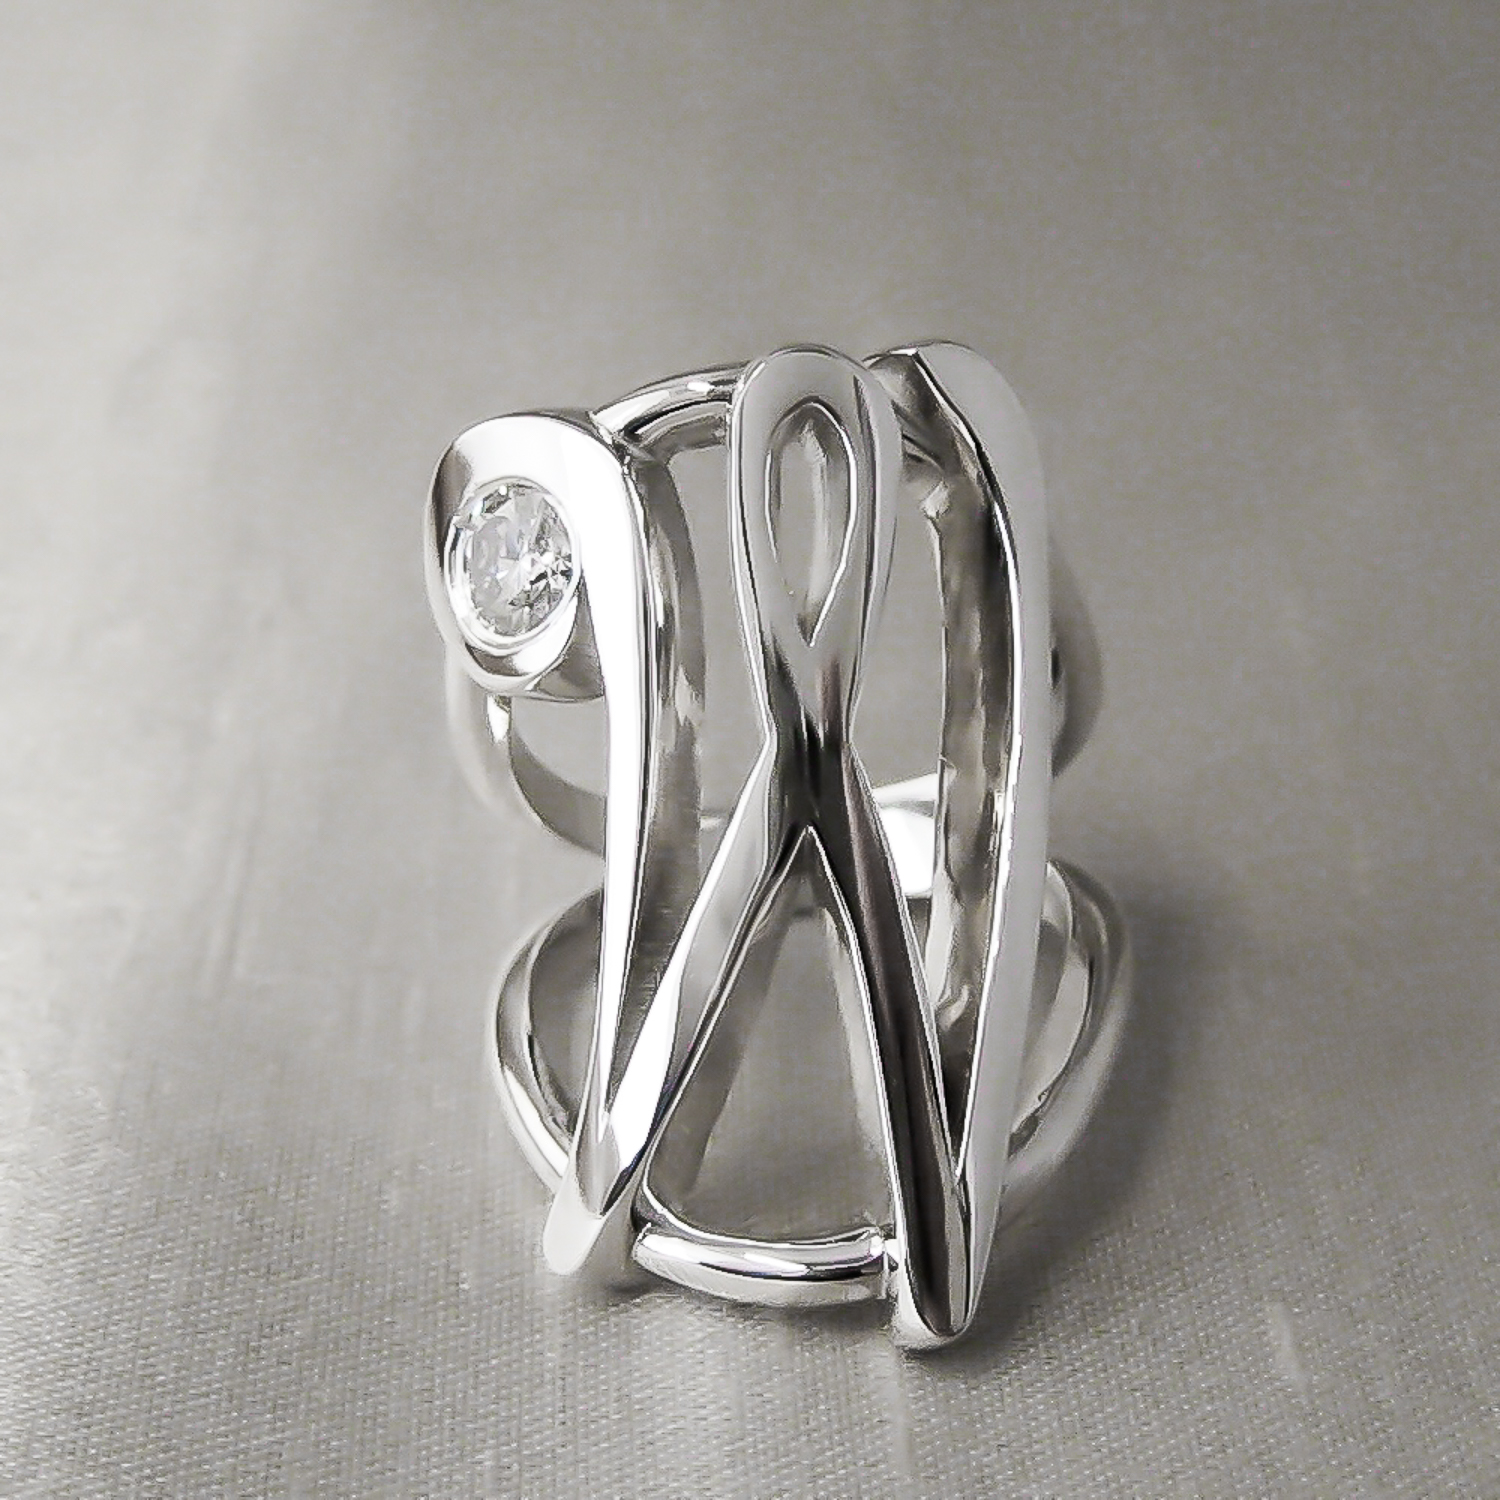   Sterling Silver Initial W Ring with Diamond.  